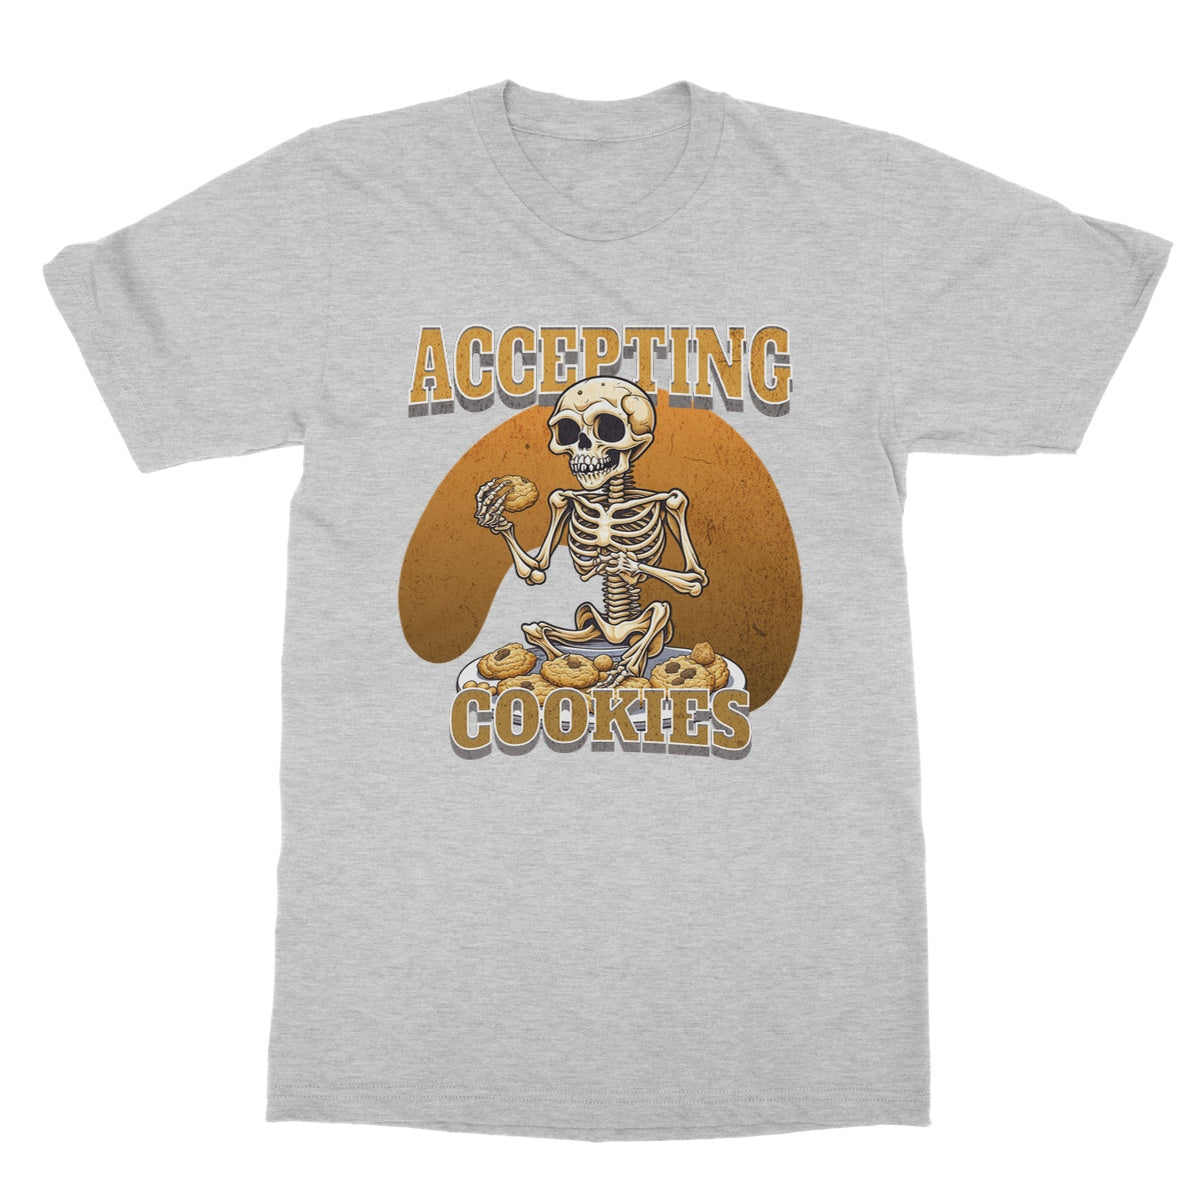 accepting cookies t shirt sports grey